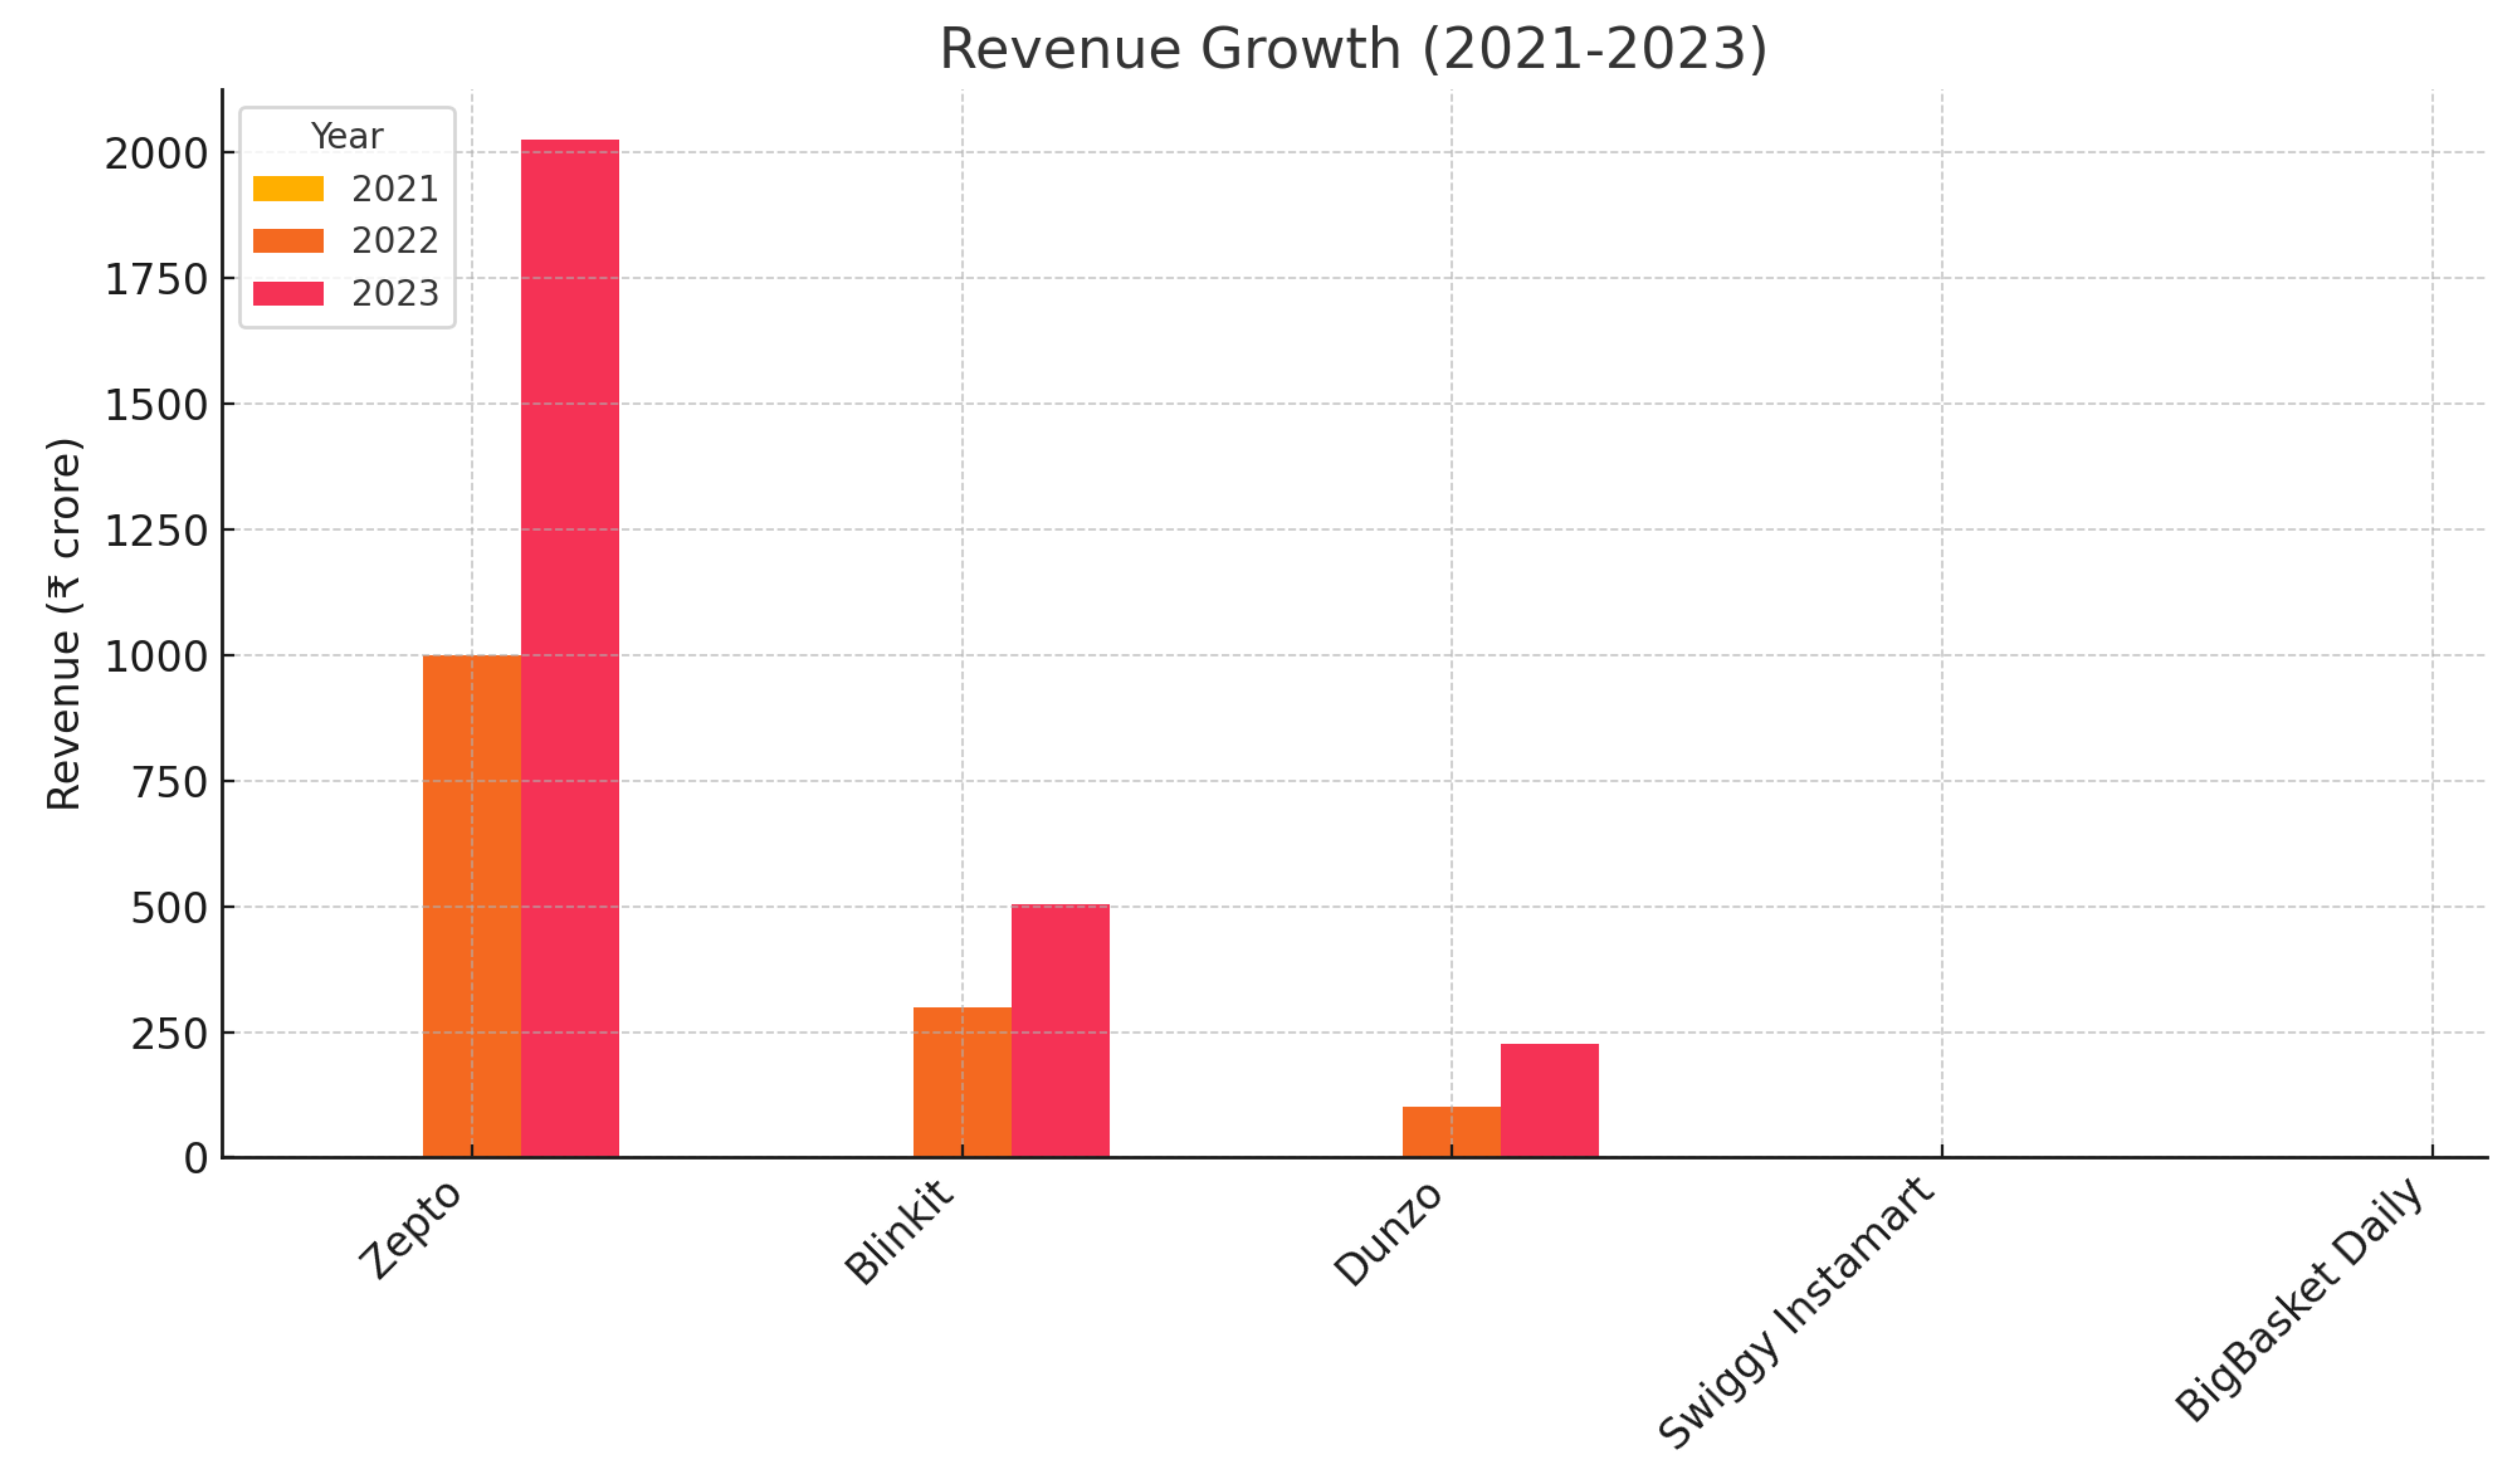 Bar chart showing revenue growth from 2021 to 2023 for Zepto, Blinkit, and Dunzo. Zepto's revenue increases from ₹0 in 2021 to ₹2024 crore in 2023, Blinkit's from ₹0 in 2021 to ₹505 crore in 2023, and Dunzo's from ₹0 in 2021 to ₹226 crore in 2023. Data for Swiggy Instamart and BigBasket Daily is not available.